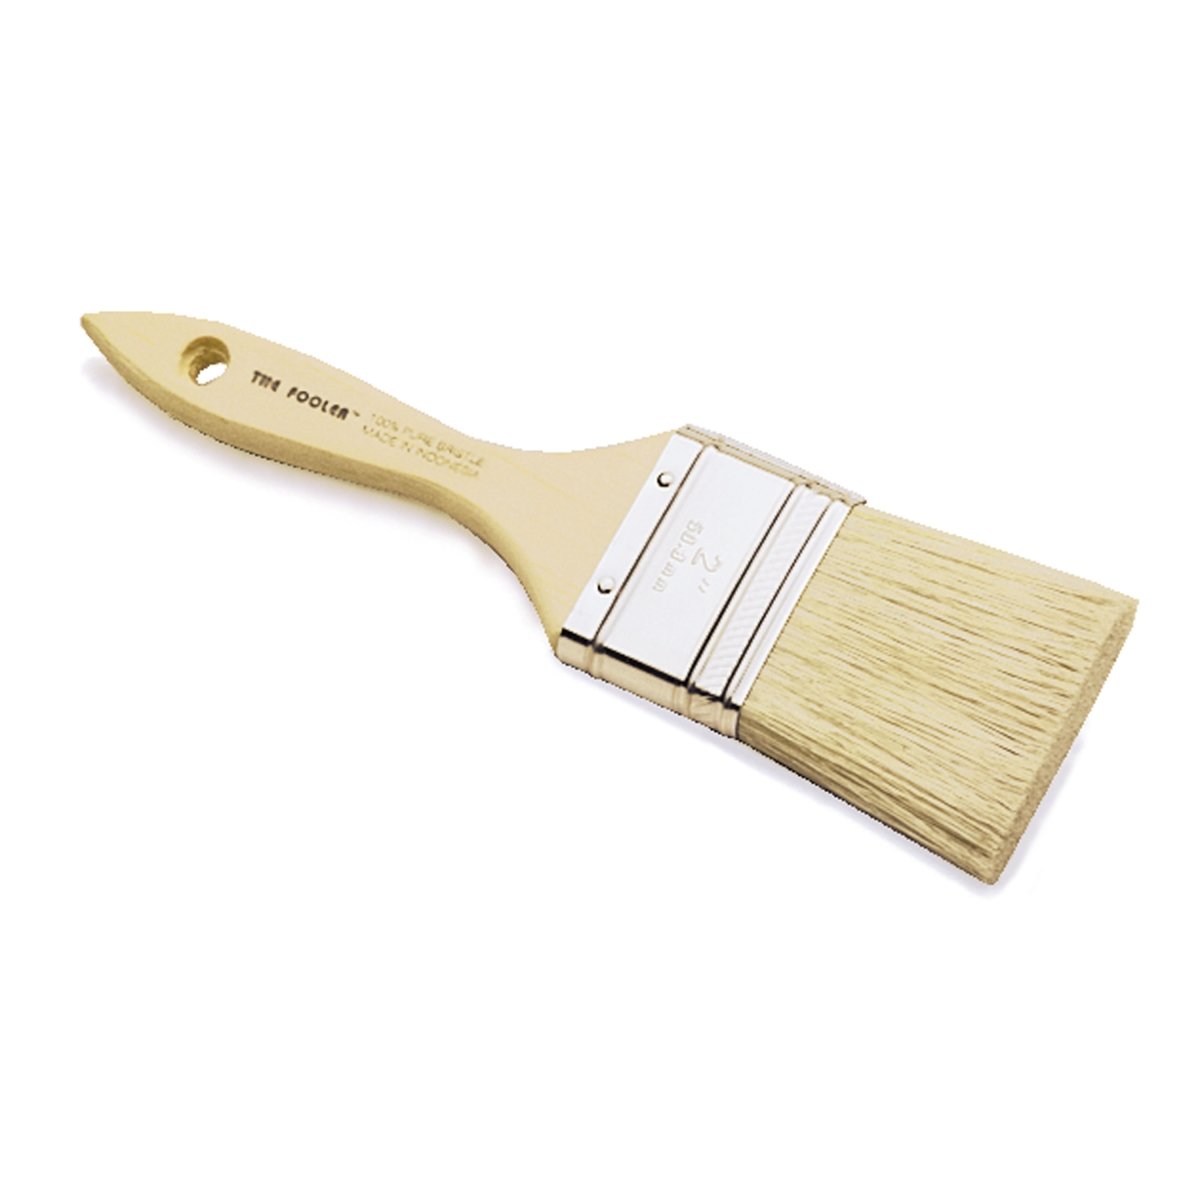 Picture of Redtree Industries 3003.3959 10025 in.The Fooler in. Double Thick Disposable Paint Brush - 2.5 in.